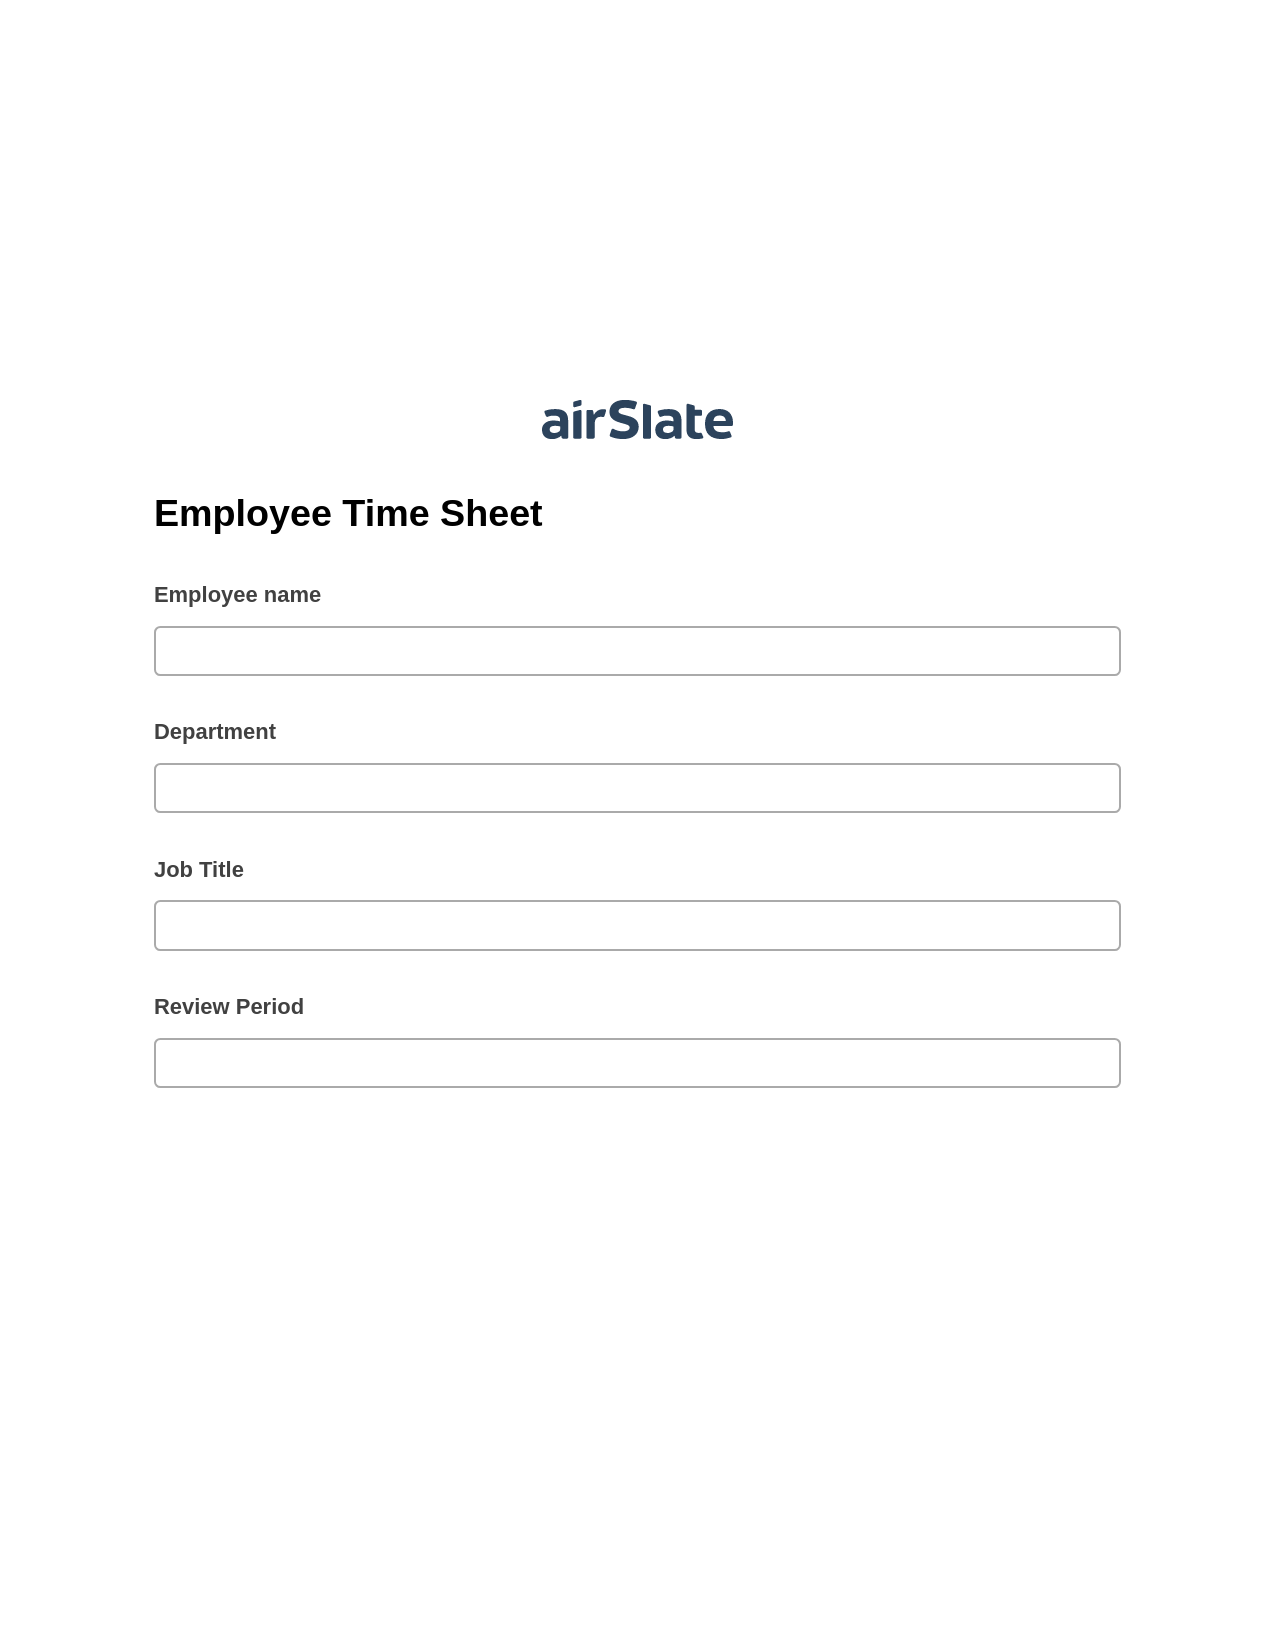 Multirole Employee Time Sheet Pre-fill from Google Sheets Bot, Google Cloud Print Bot, Export to Excel 365 Bot